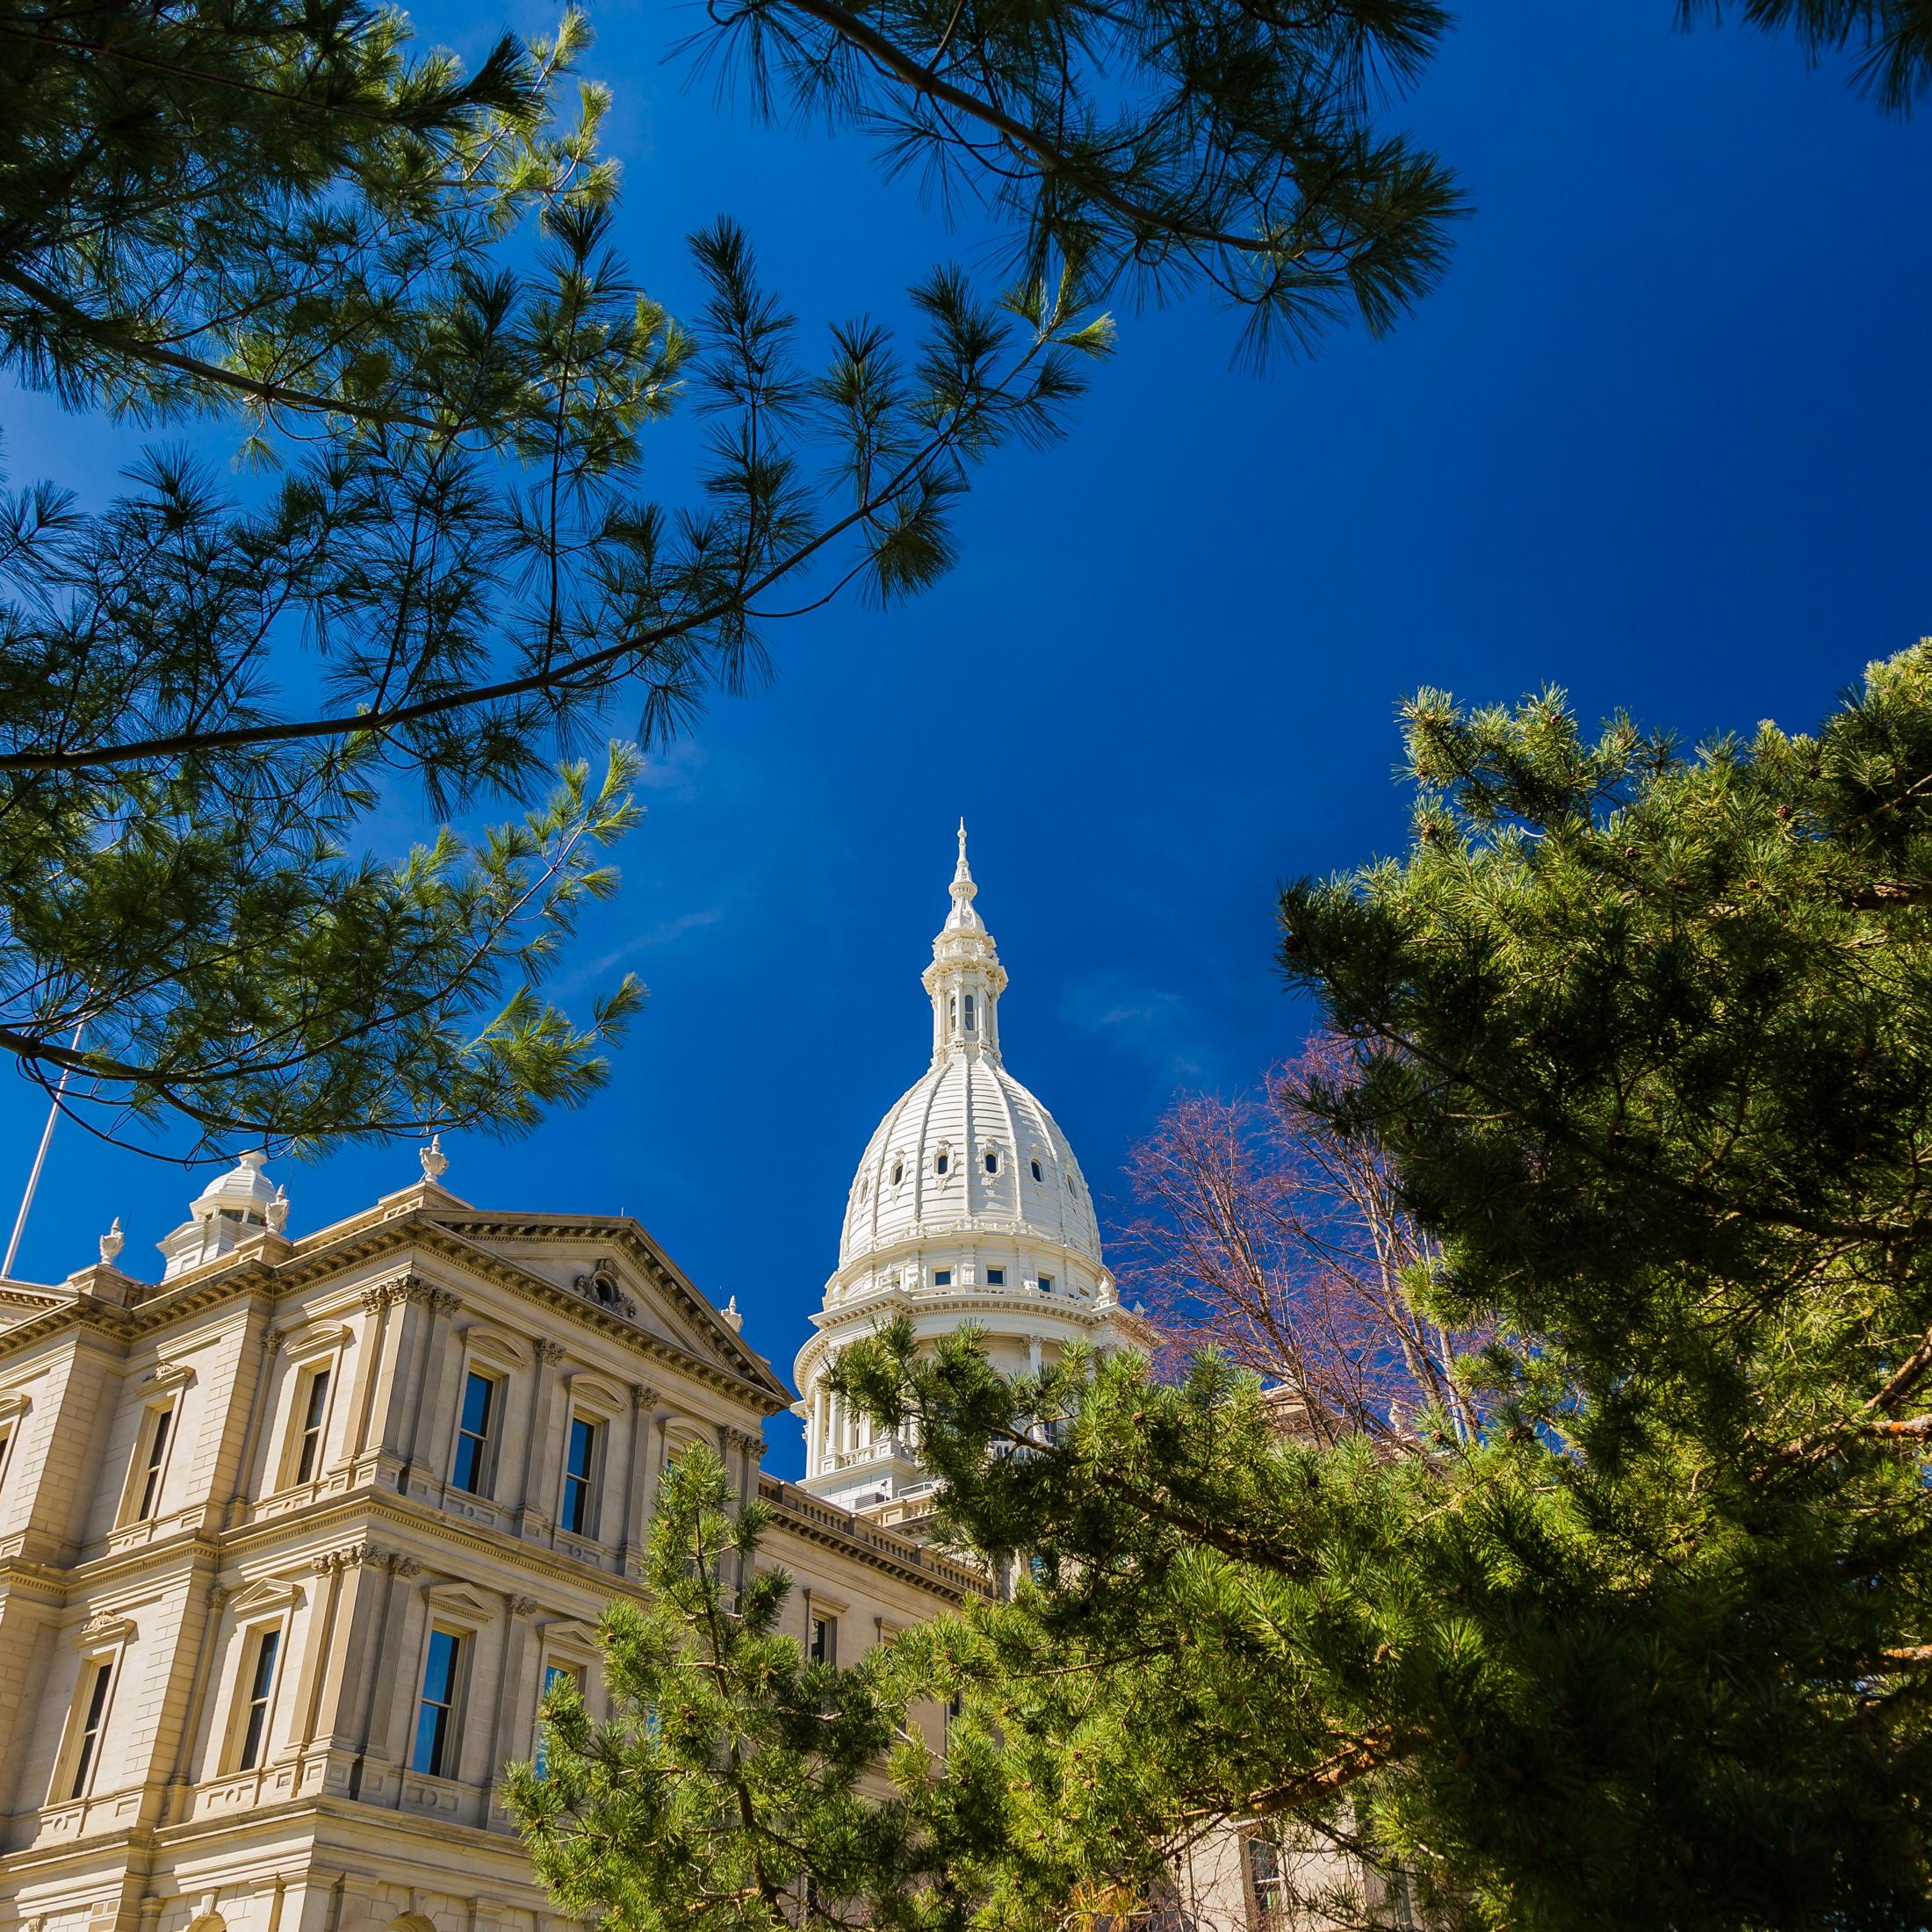 The dome of Michigan's statehouse framed by tree branches and a bright blue sky in downtown Lansing. 